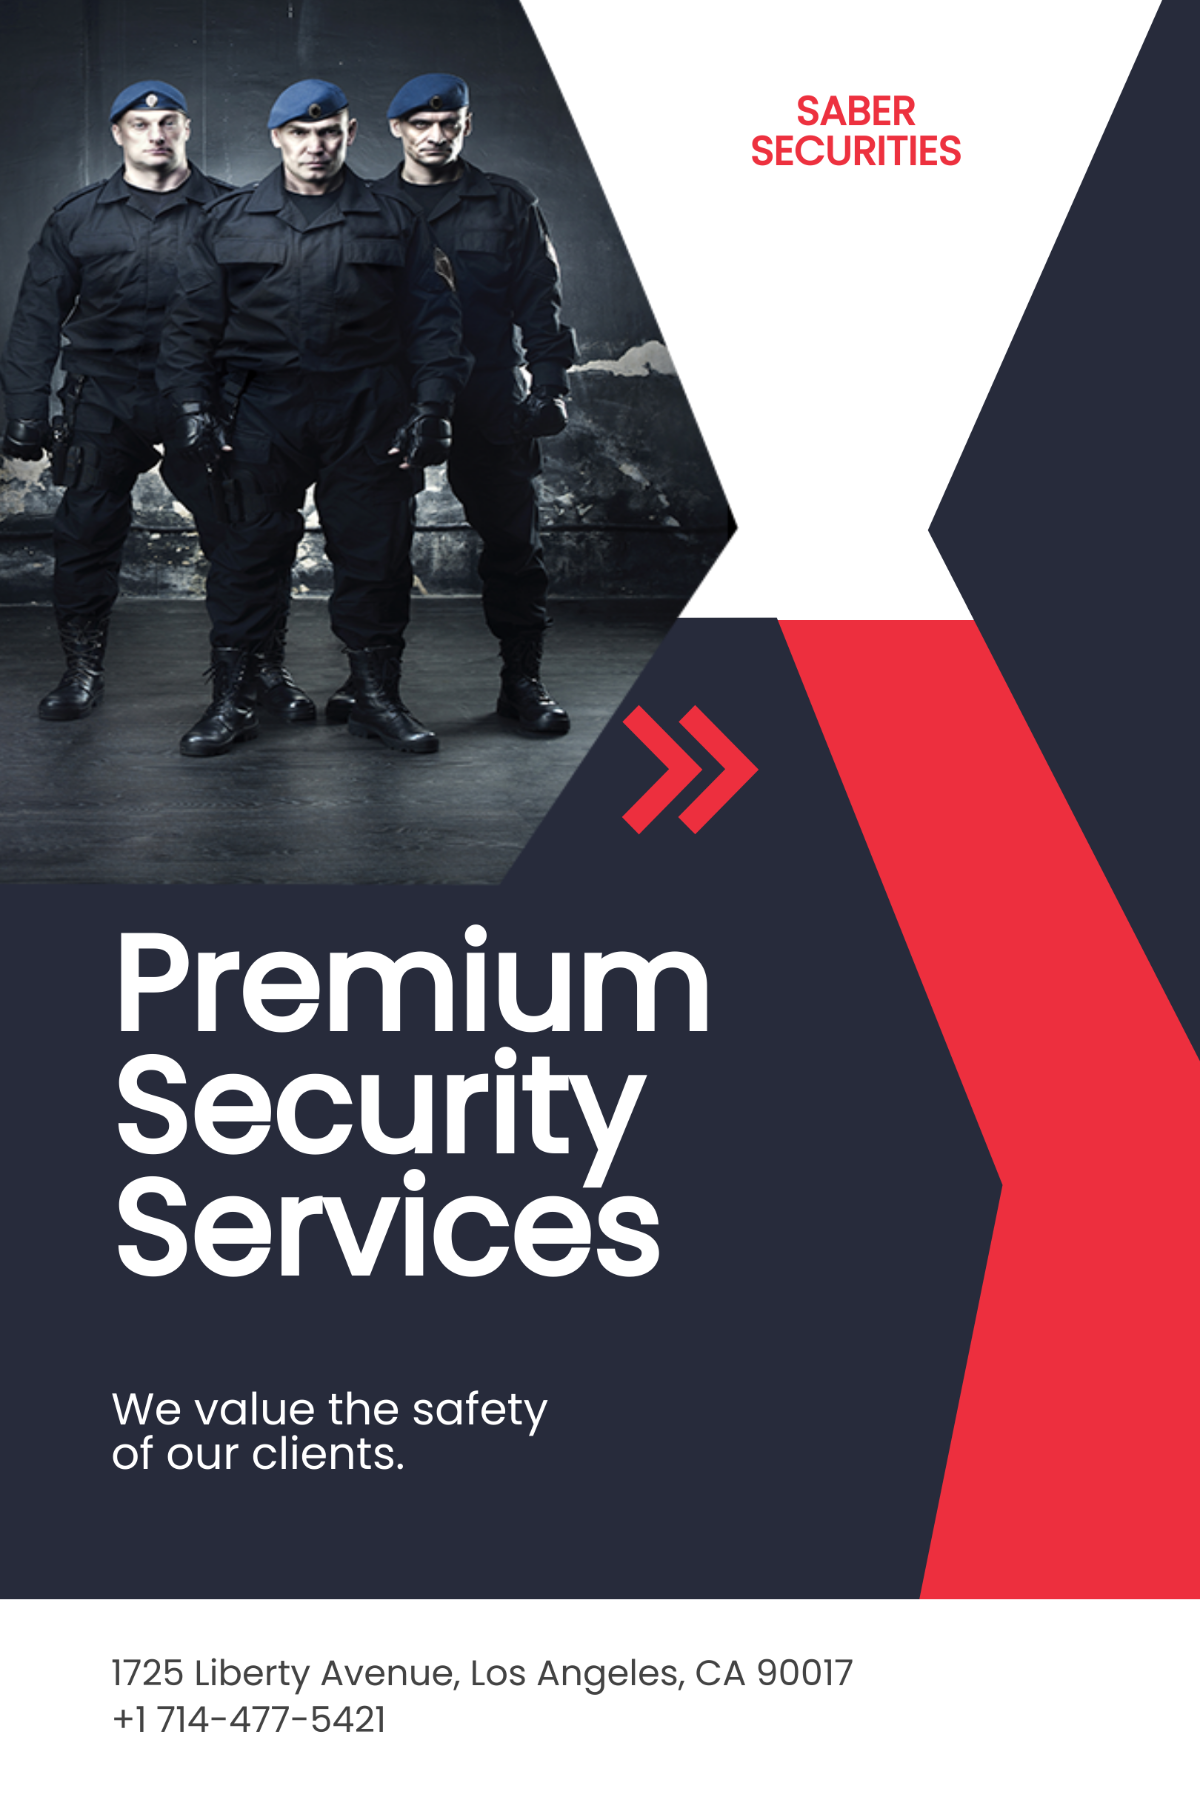 Security Guard Services Tumblr Post Template